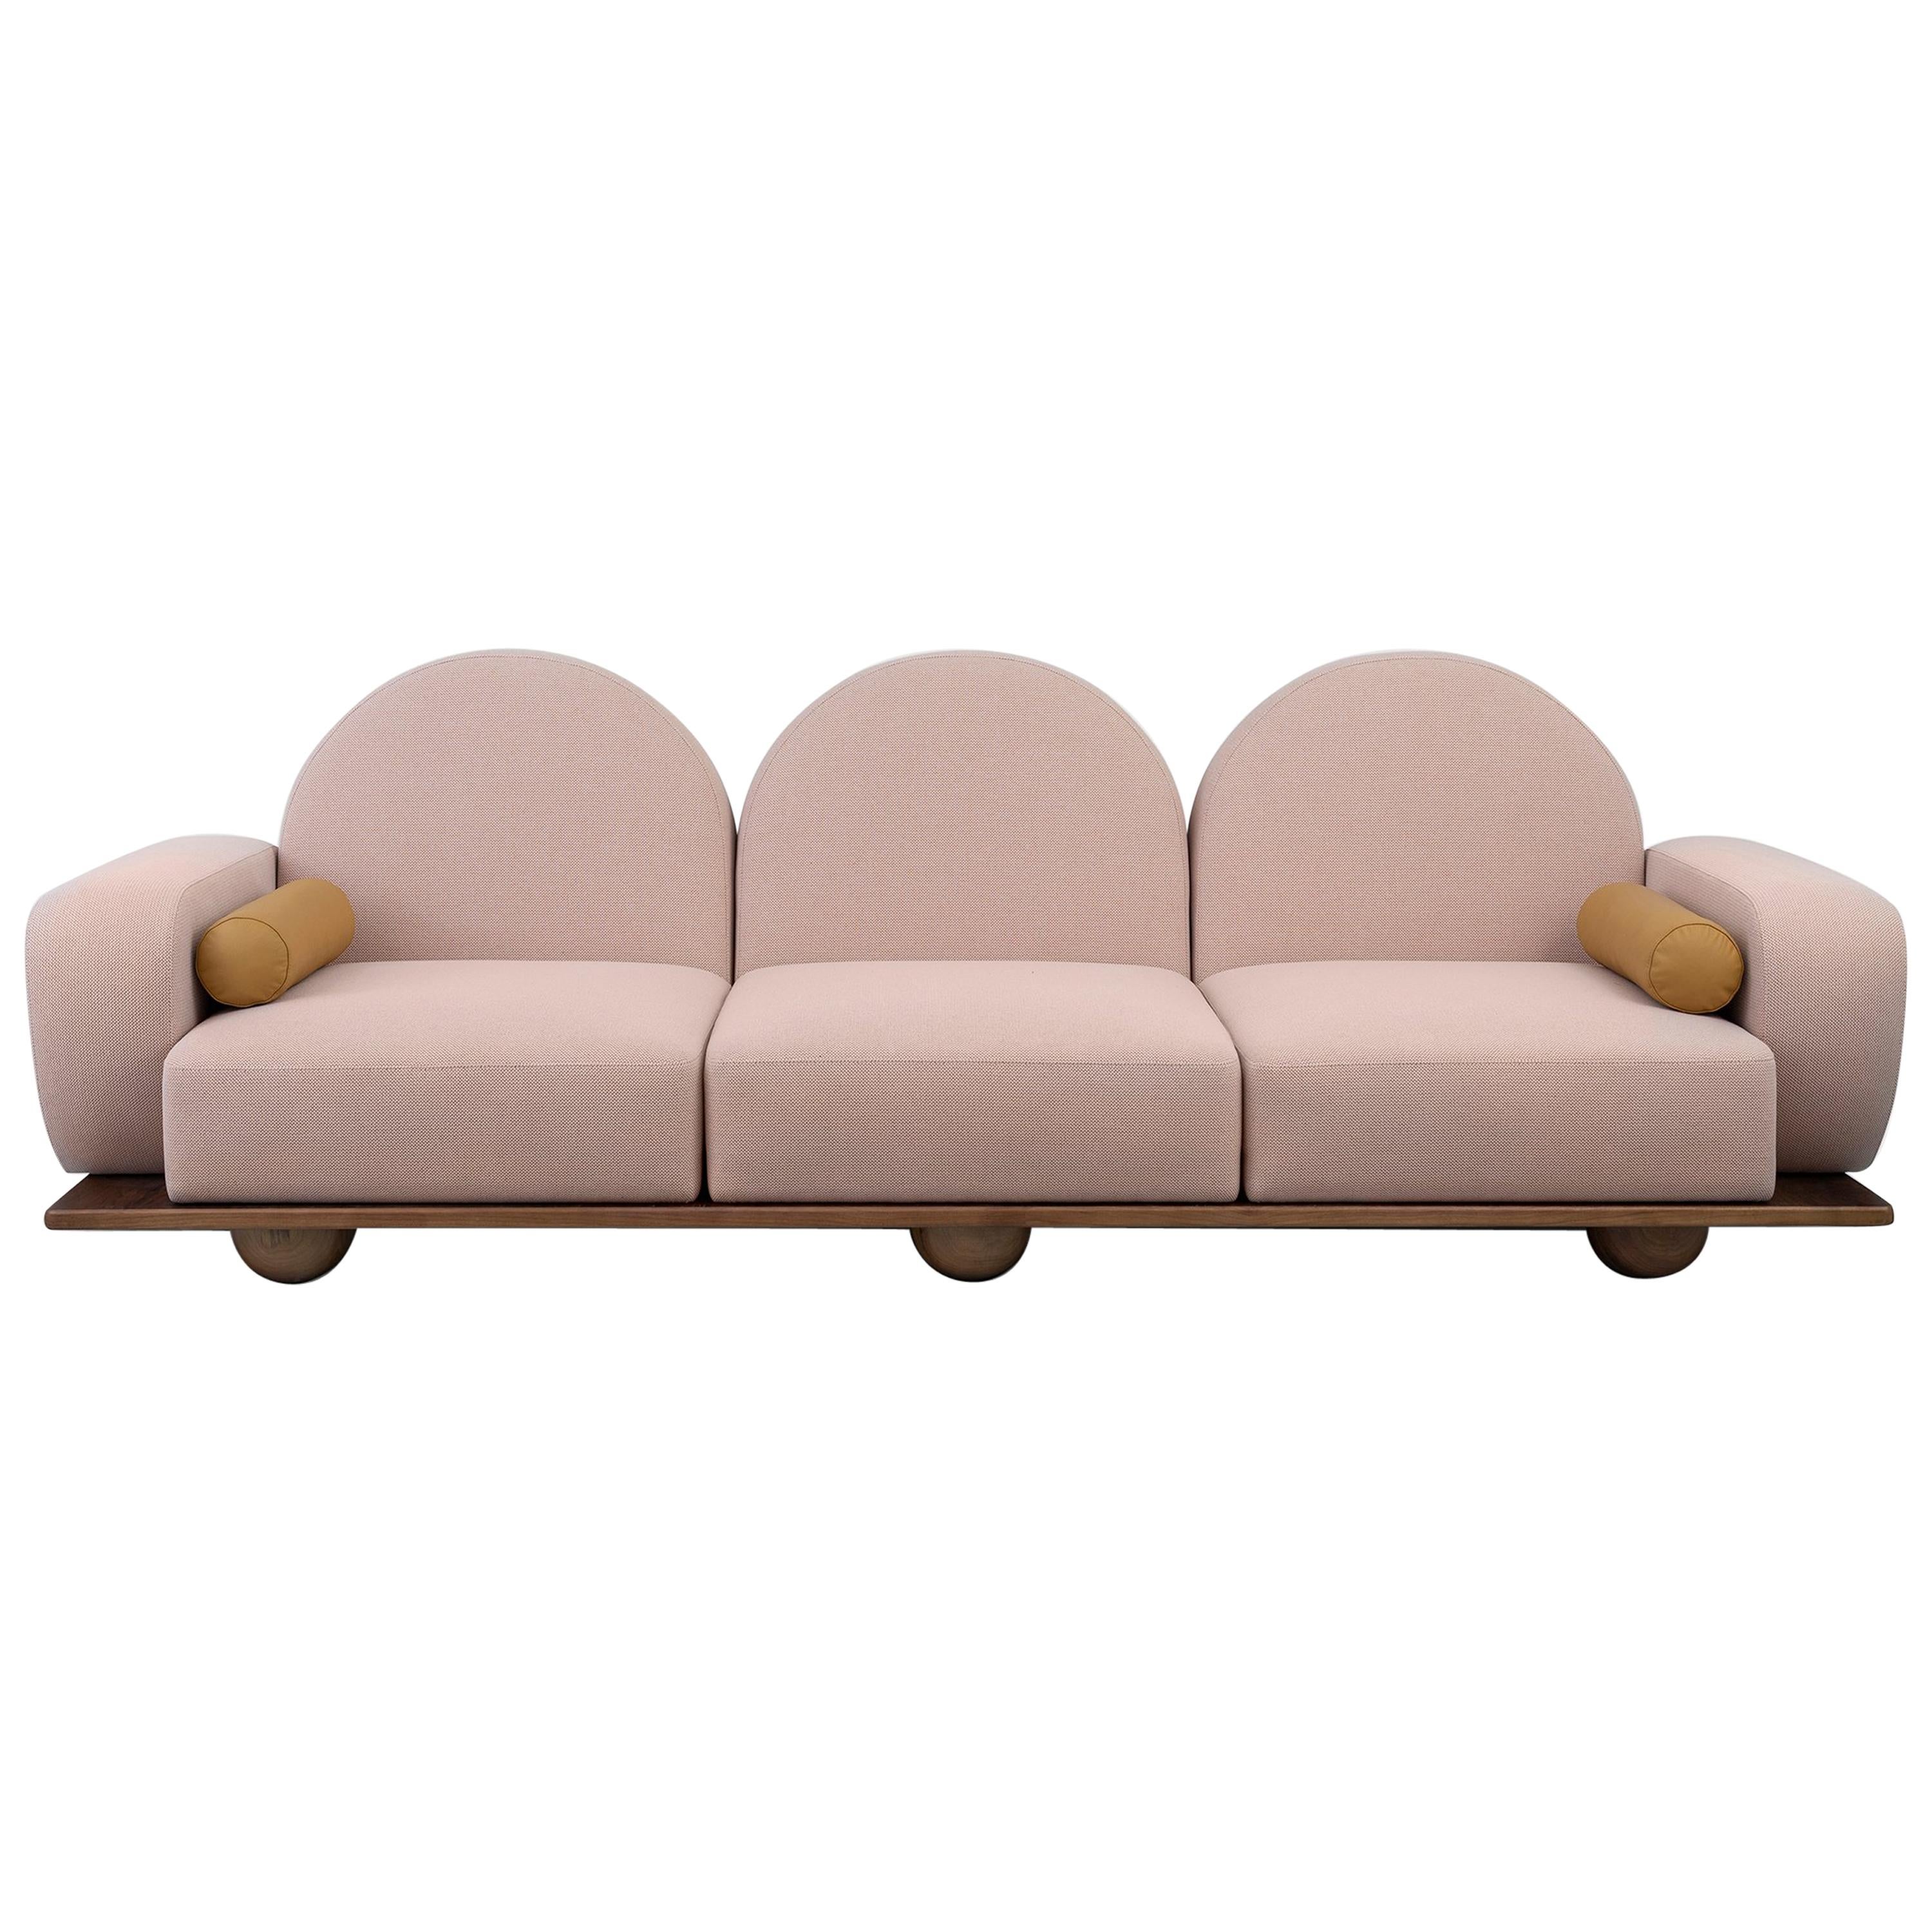 Beice 3-Seat Sofa For Sale